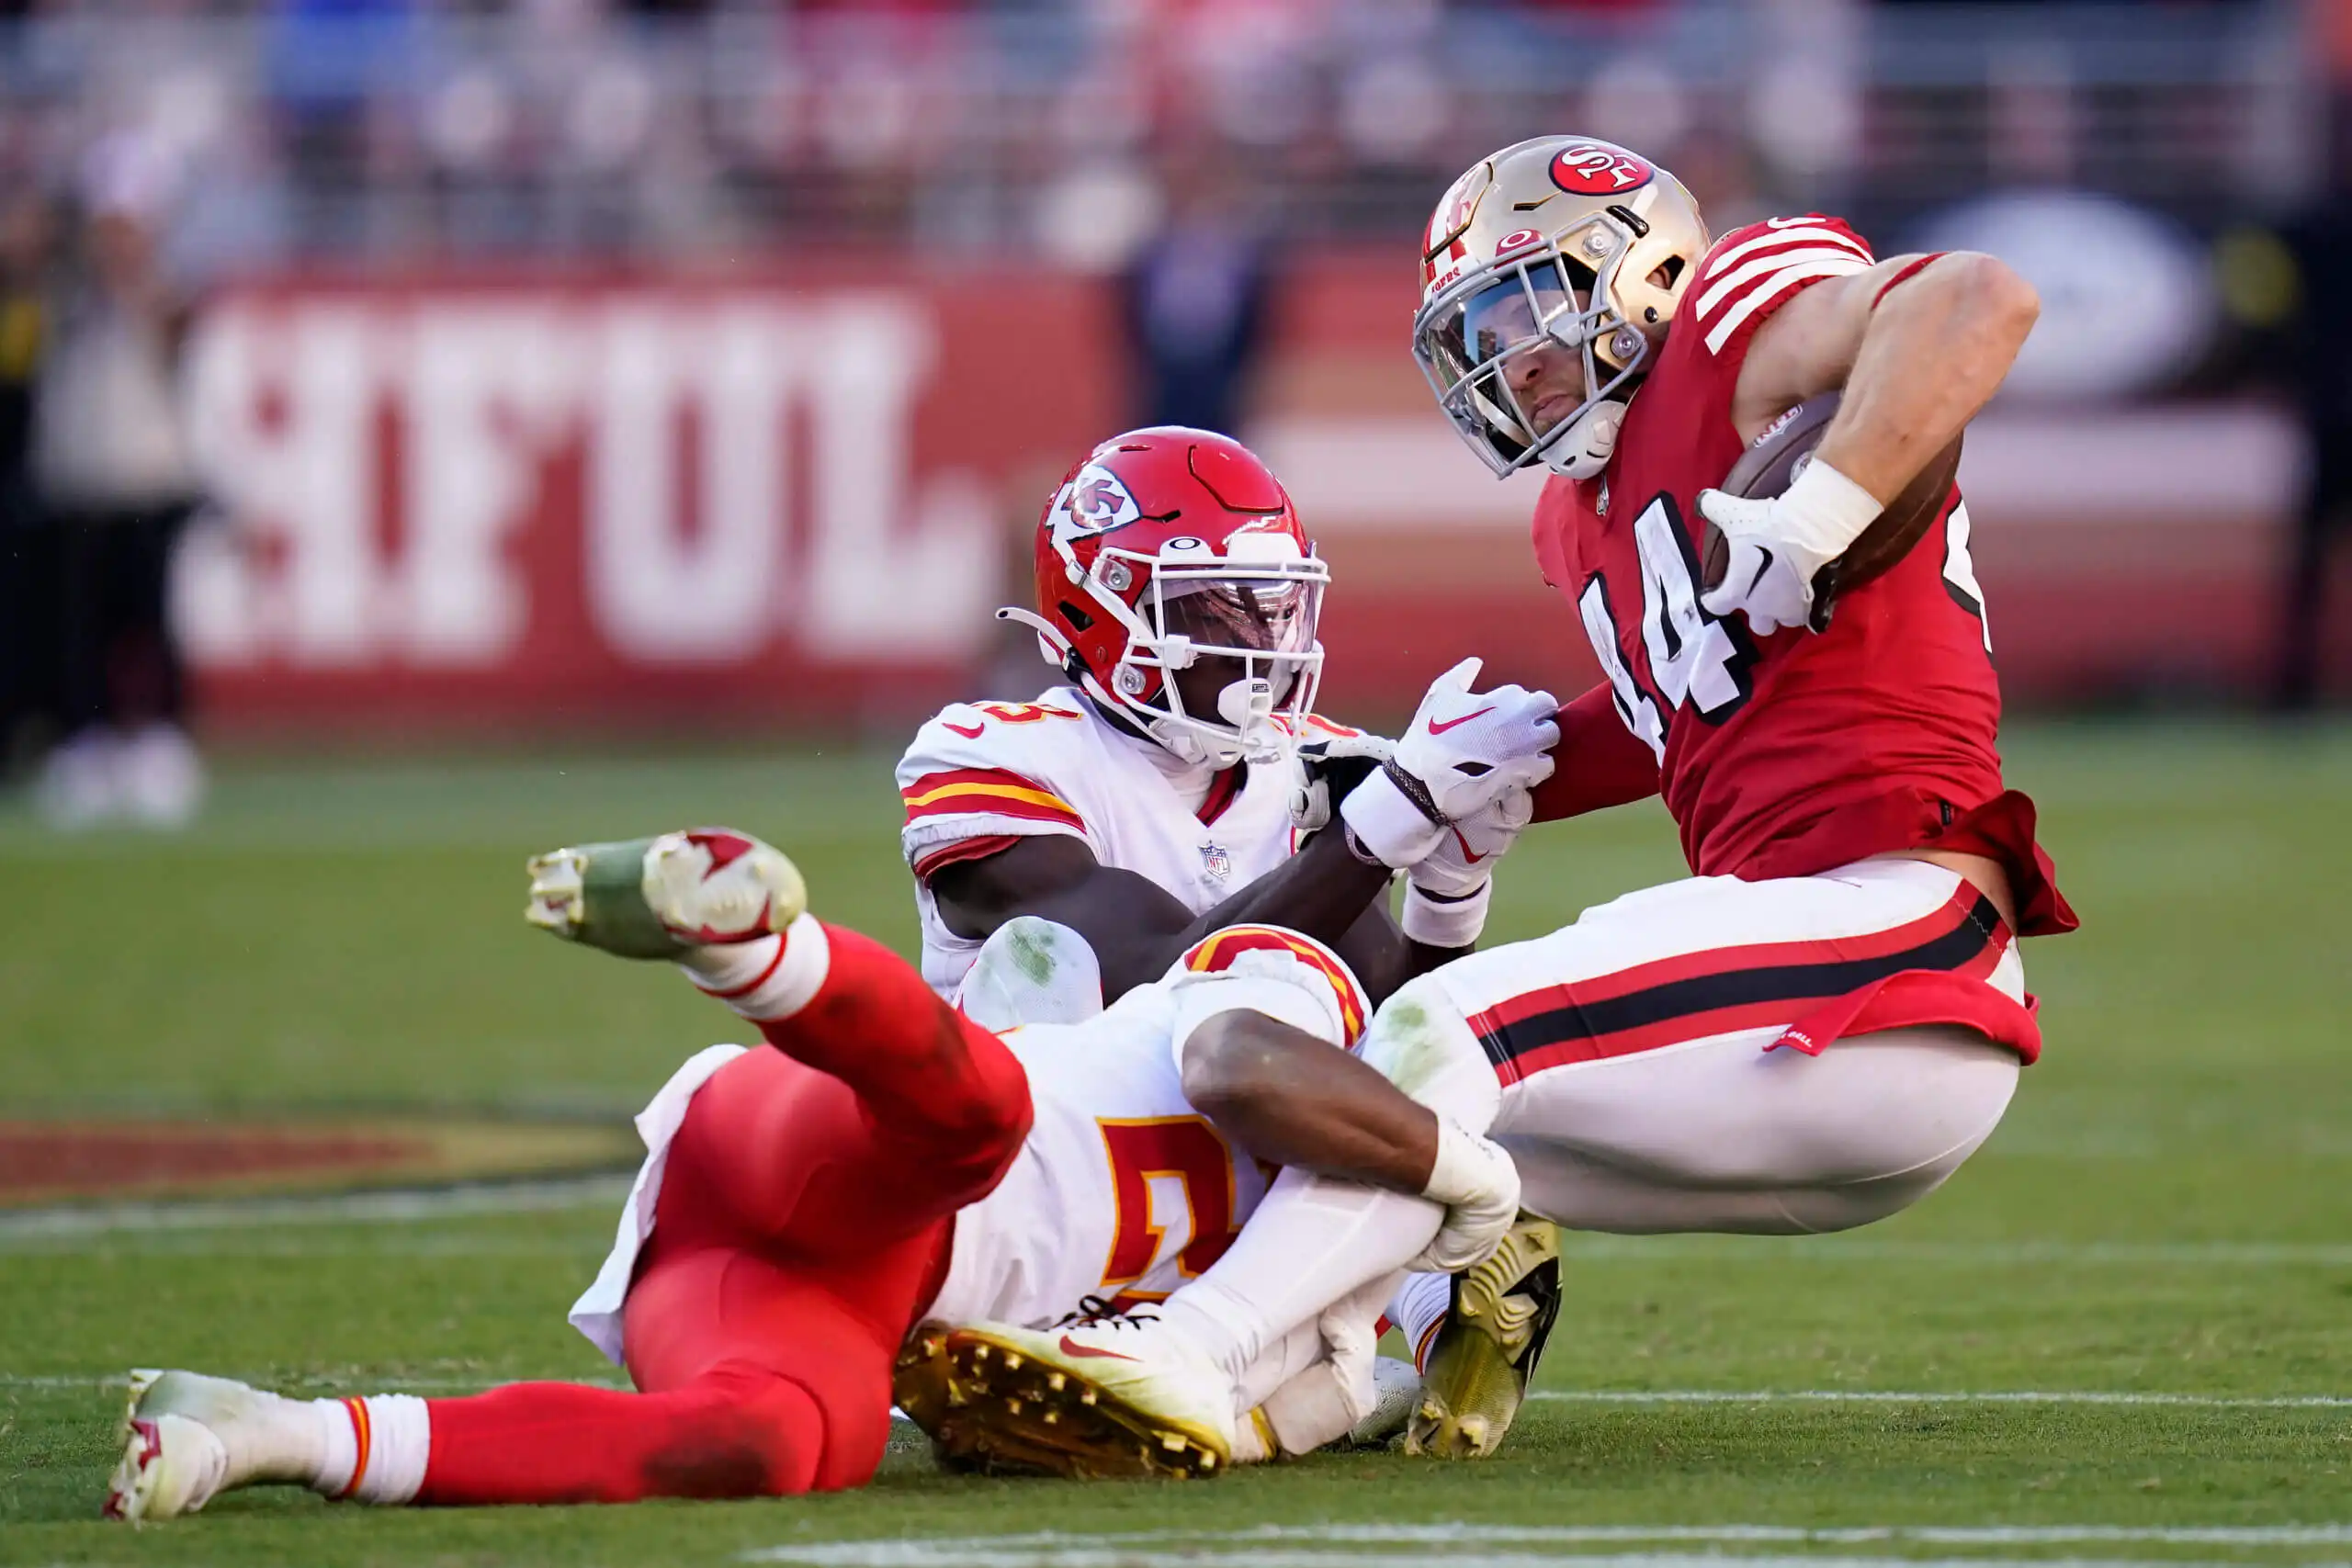 49ers fullback Kyle Juszczyk undergoes finger surgery, doubtful for Rams game